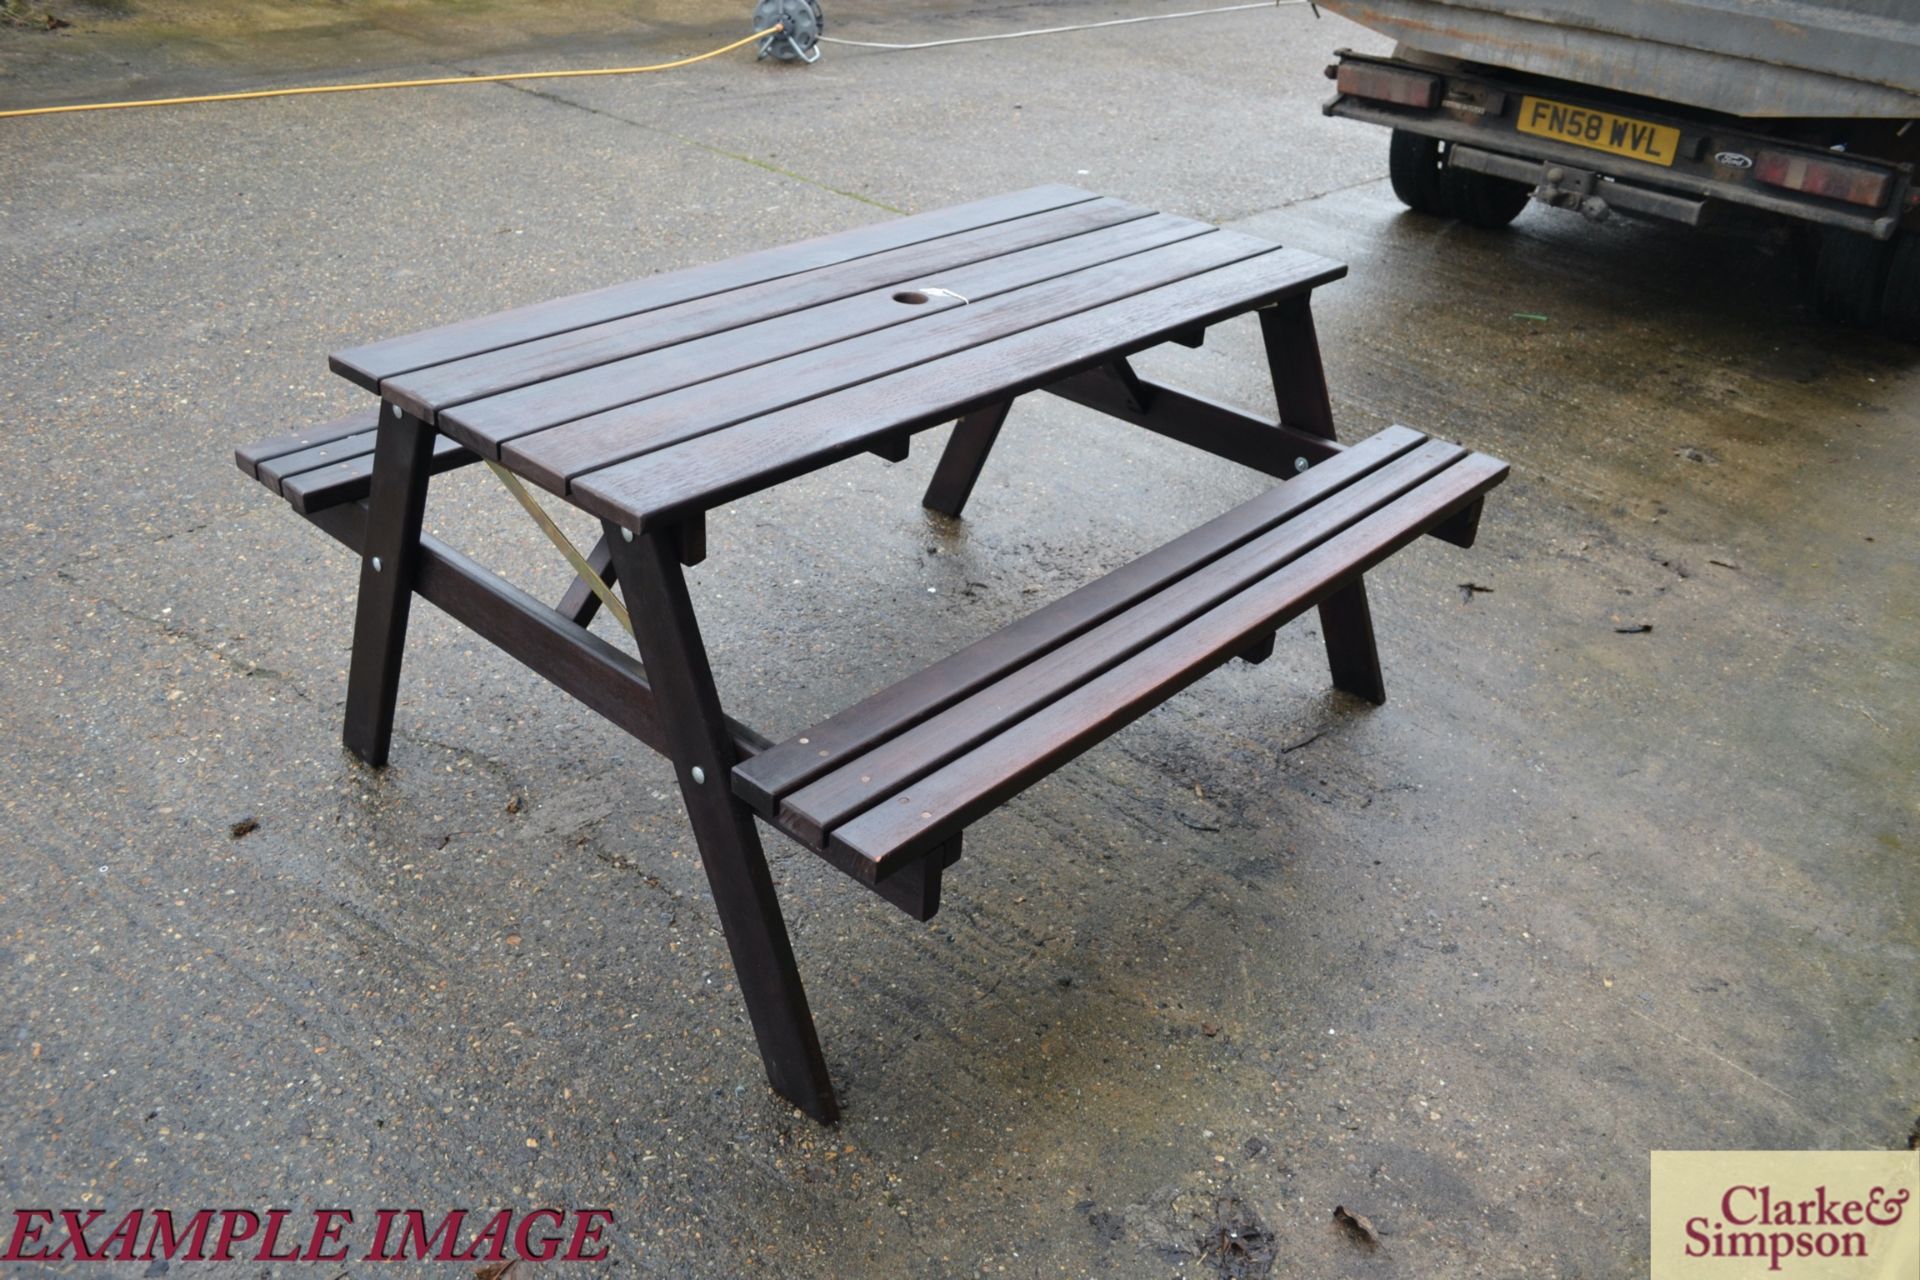 10x stained Eucalyptus 1.5m 6 seater picnic bench. - Image 6 of 6